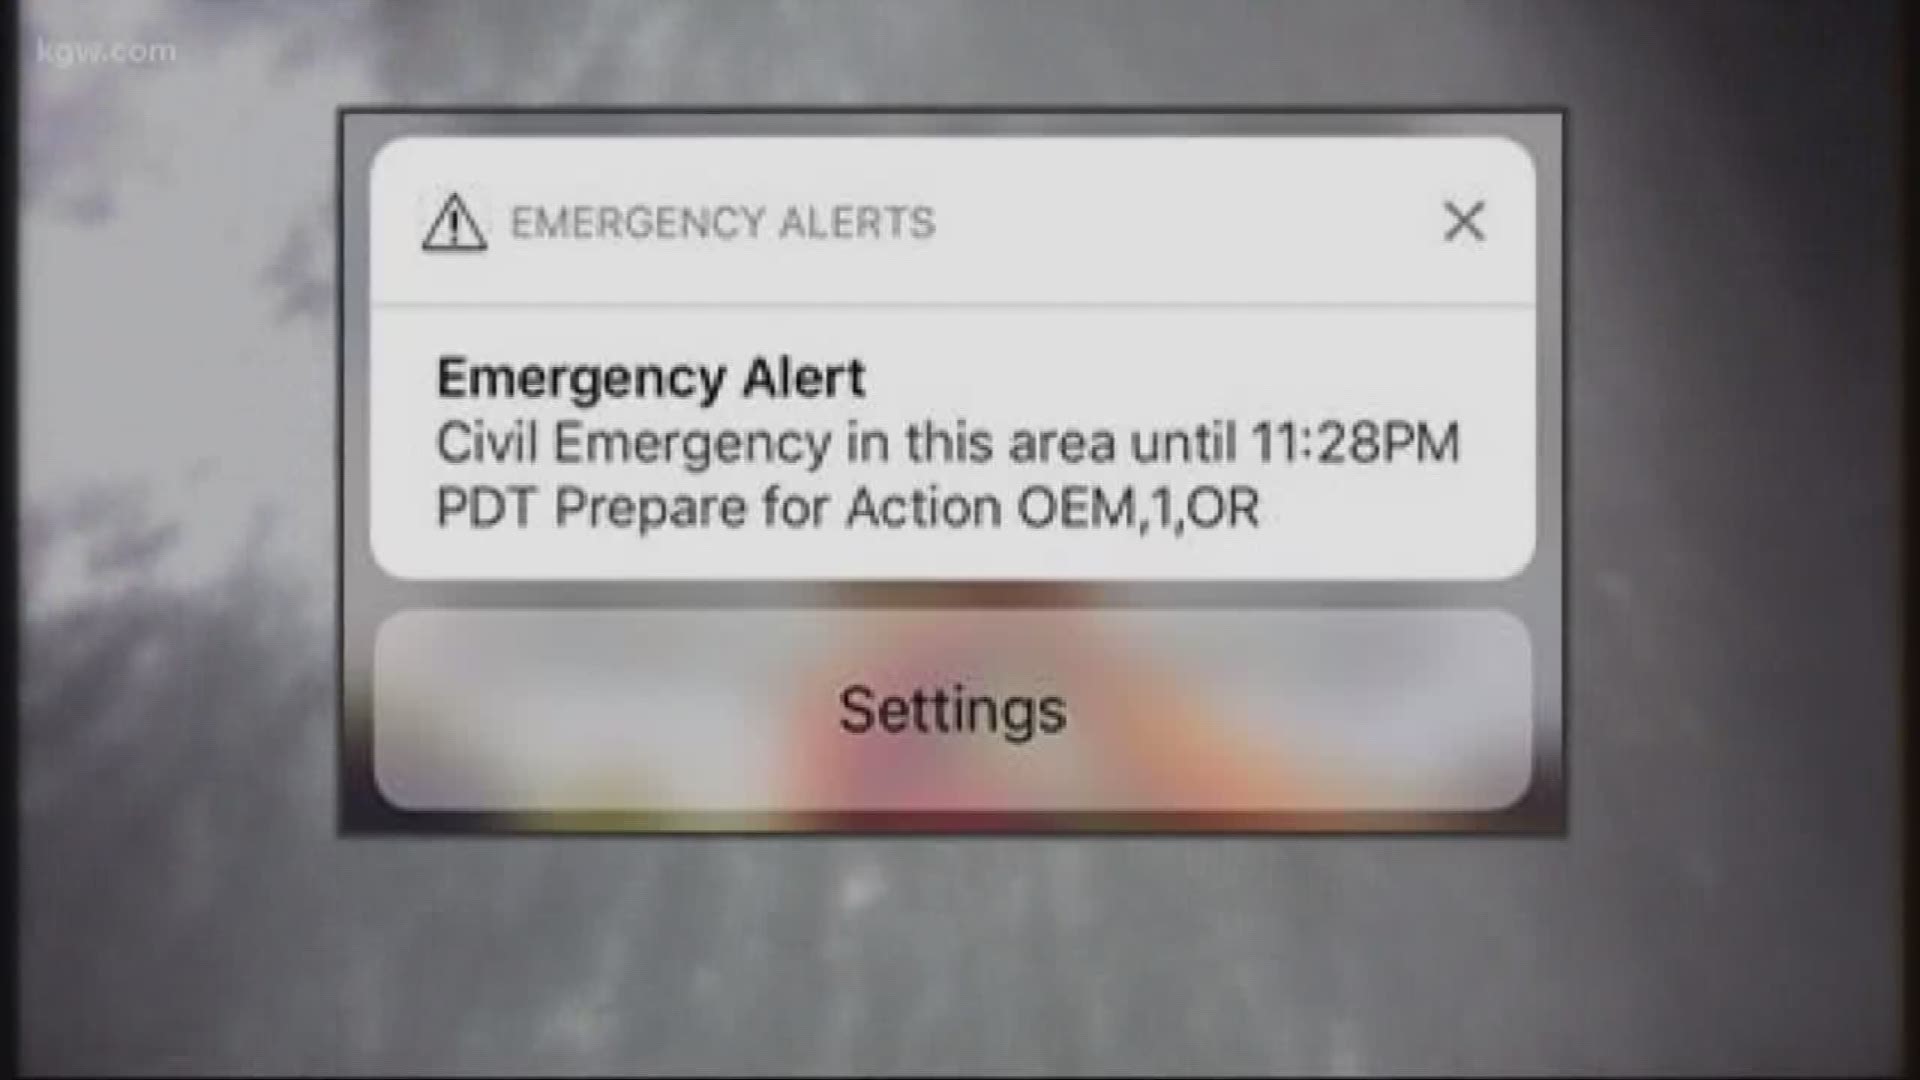  If you received an emergency alert on your phone Tuesday night, it was meant to tell you about the contaminated drinking water in the Salem area.